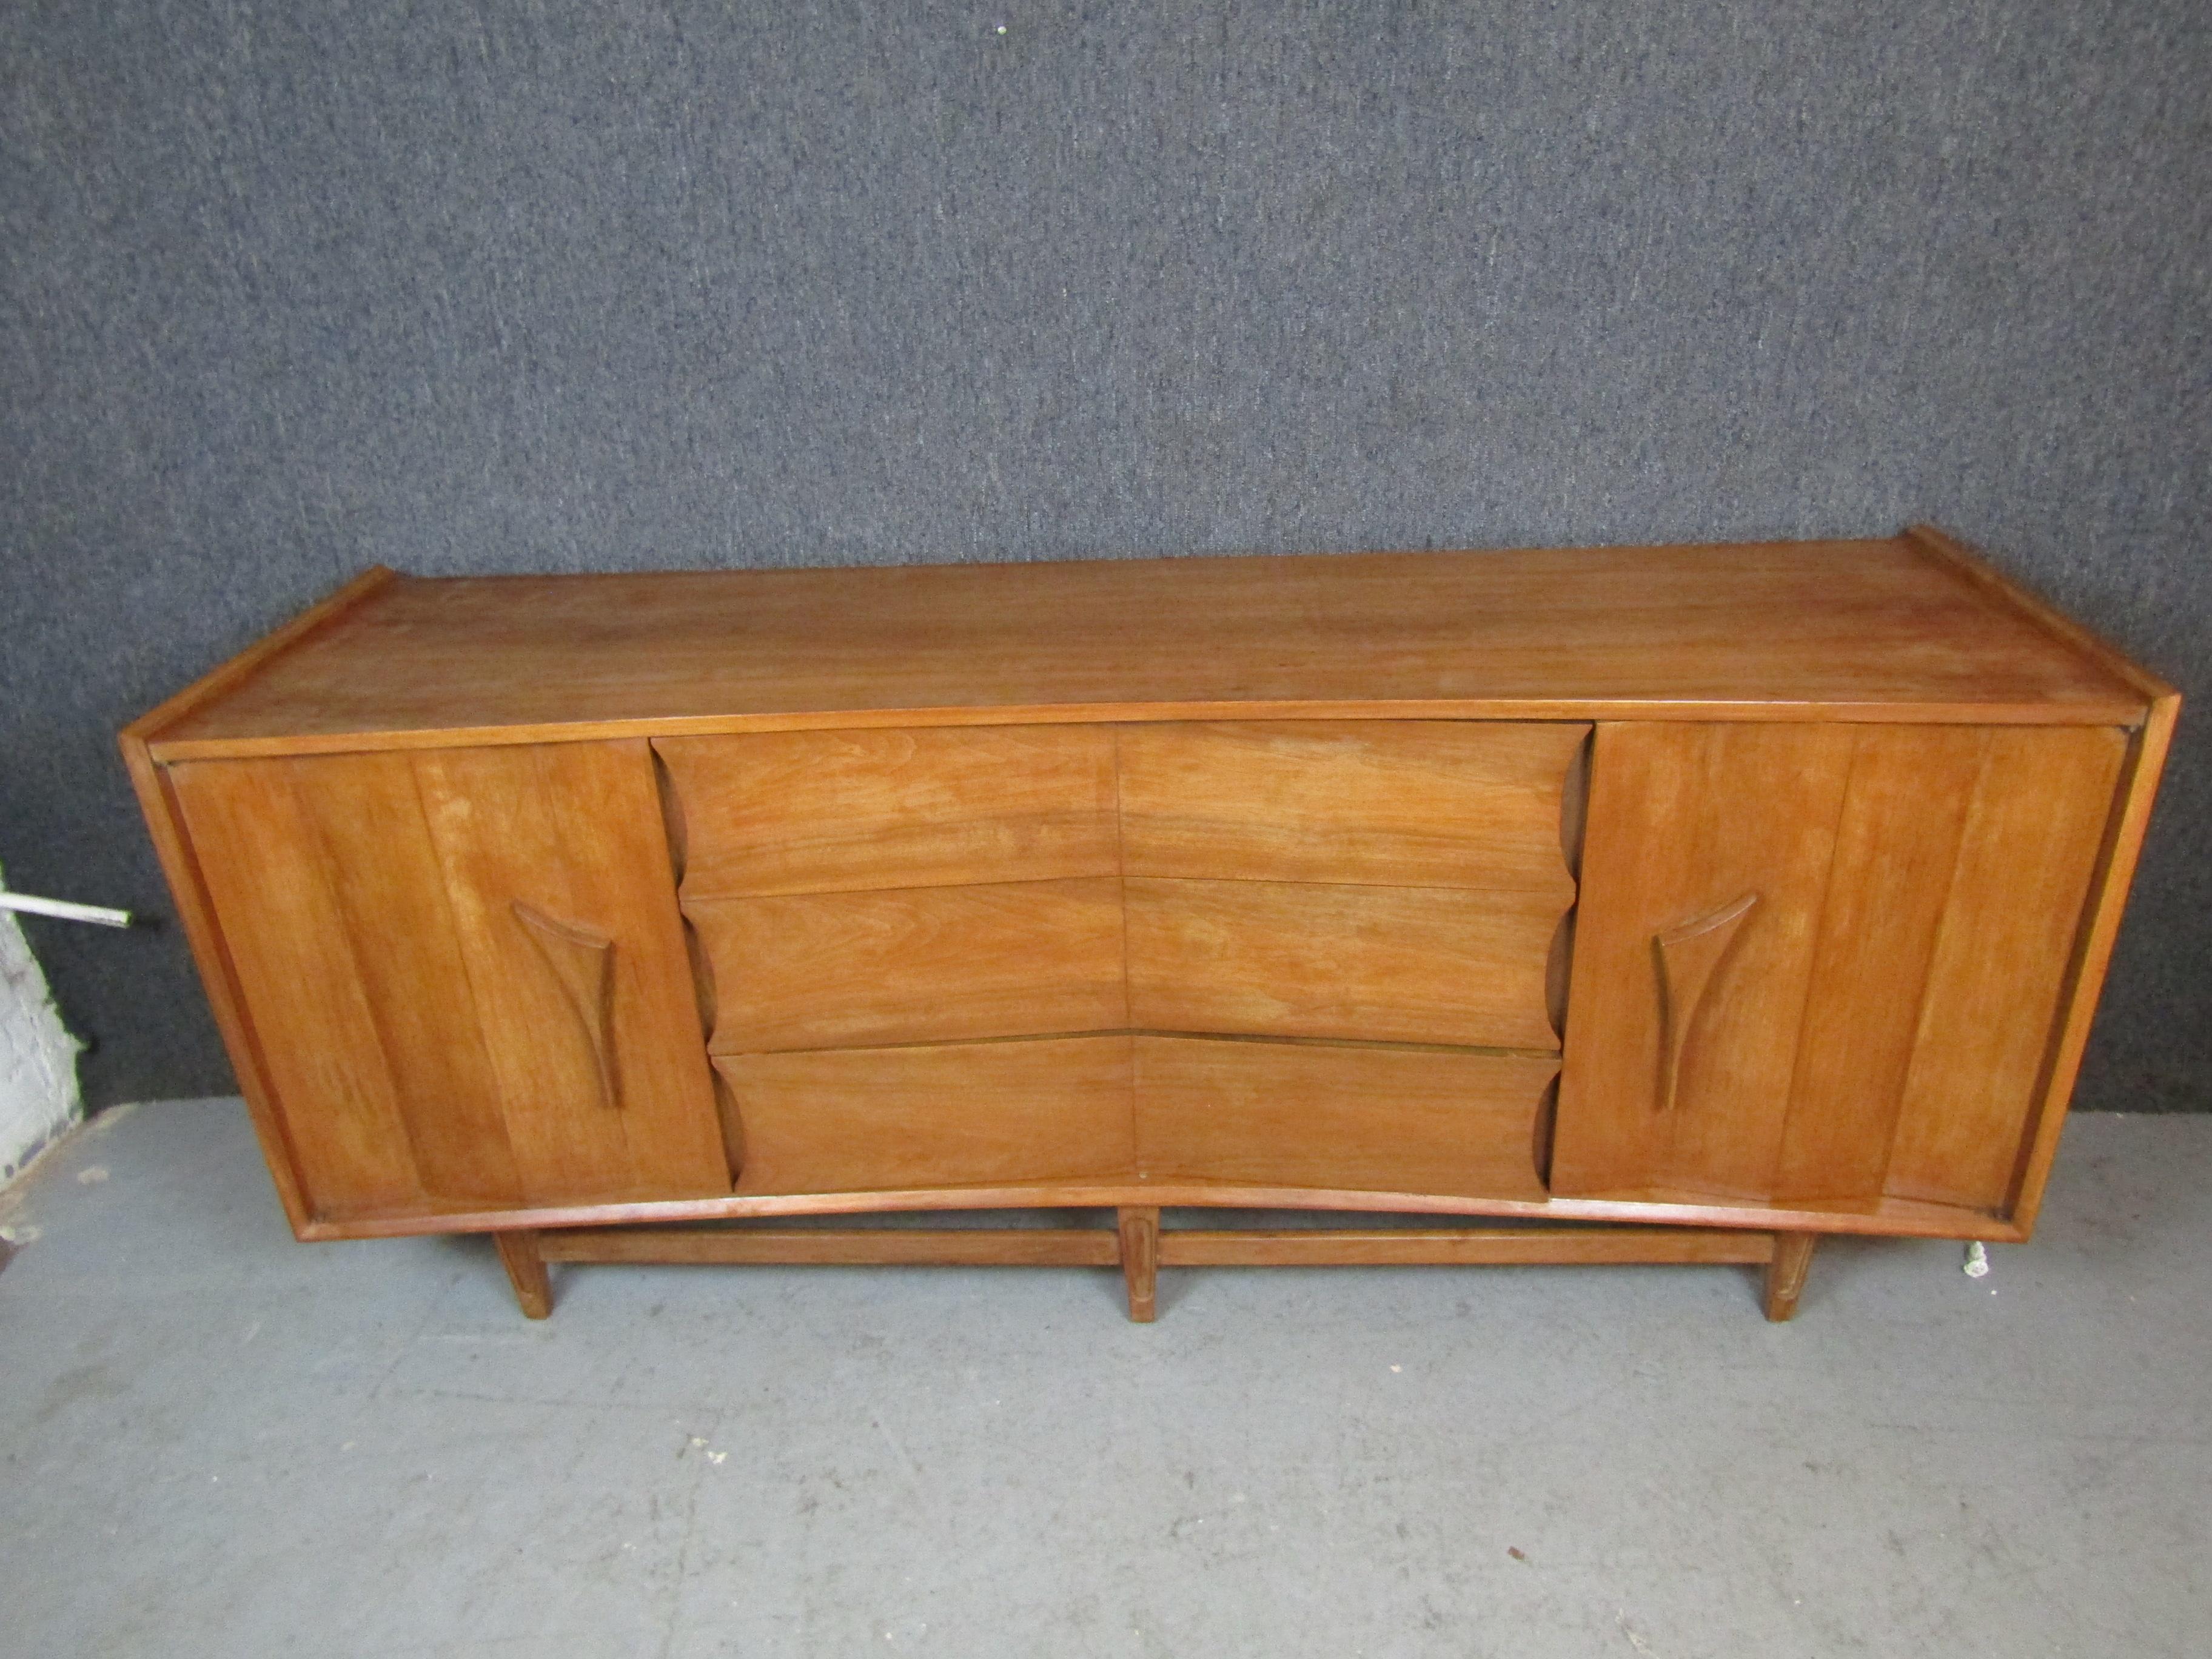 Bring home the artisanal craftsmanship that made mid-century Scandinavian furniture the envy of the world with this beautiful curved credenza from Sweden's Karlit Möbelfabriken. Wonderful carved details give this piece a funky modern feel